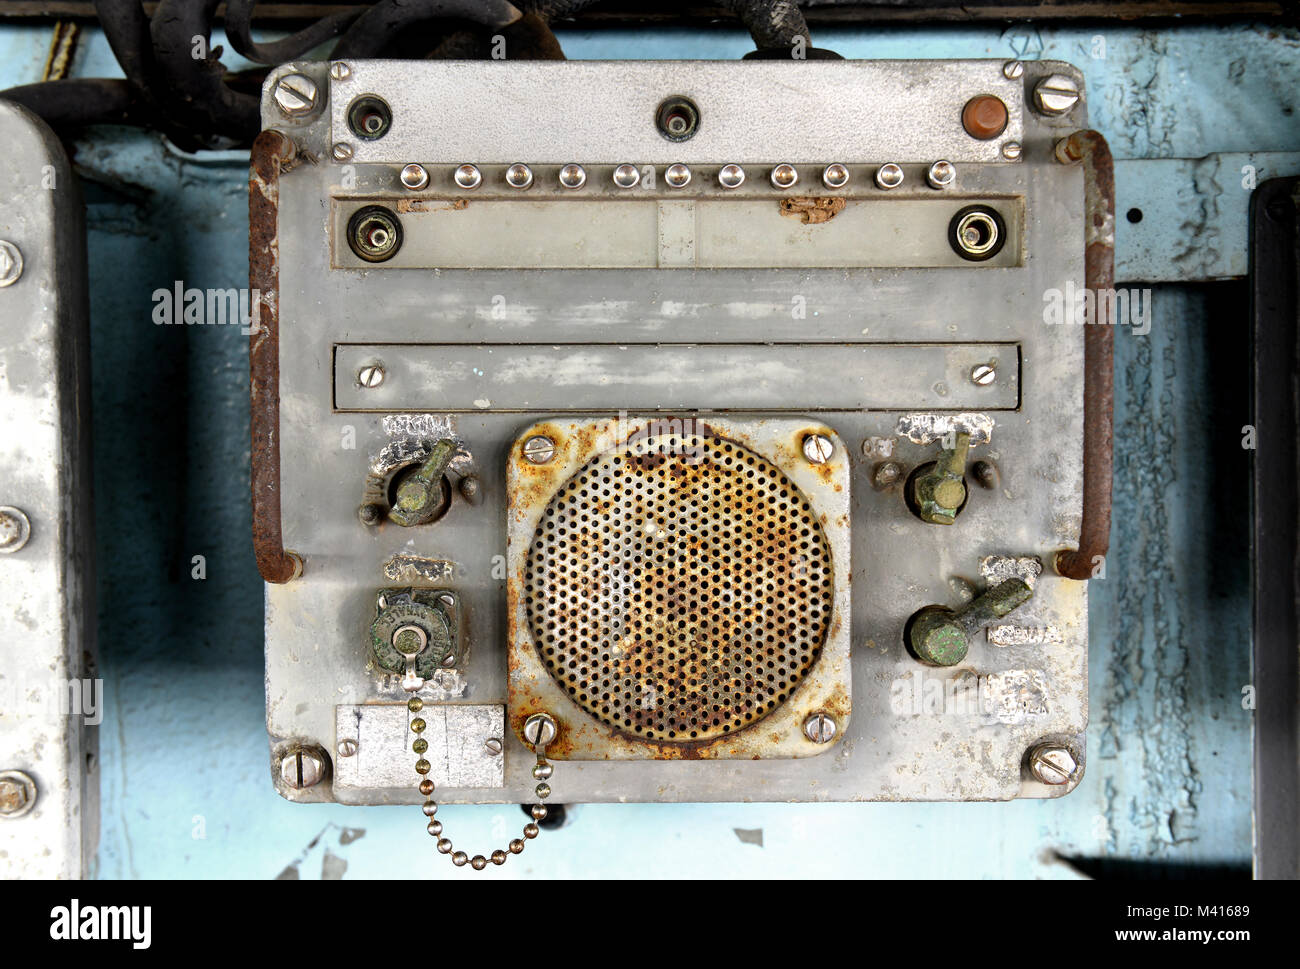 old radio on warship at museam room of war ship control at war ship museum free for tourism to look and learning about history of the war ship walk an Stock Photo